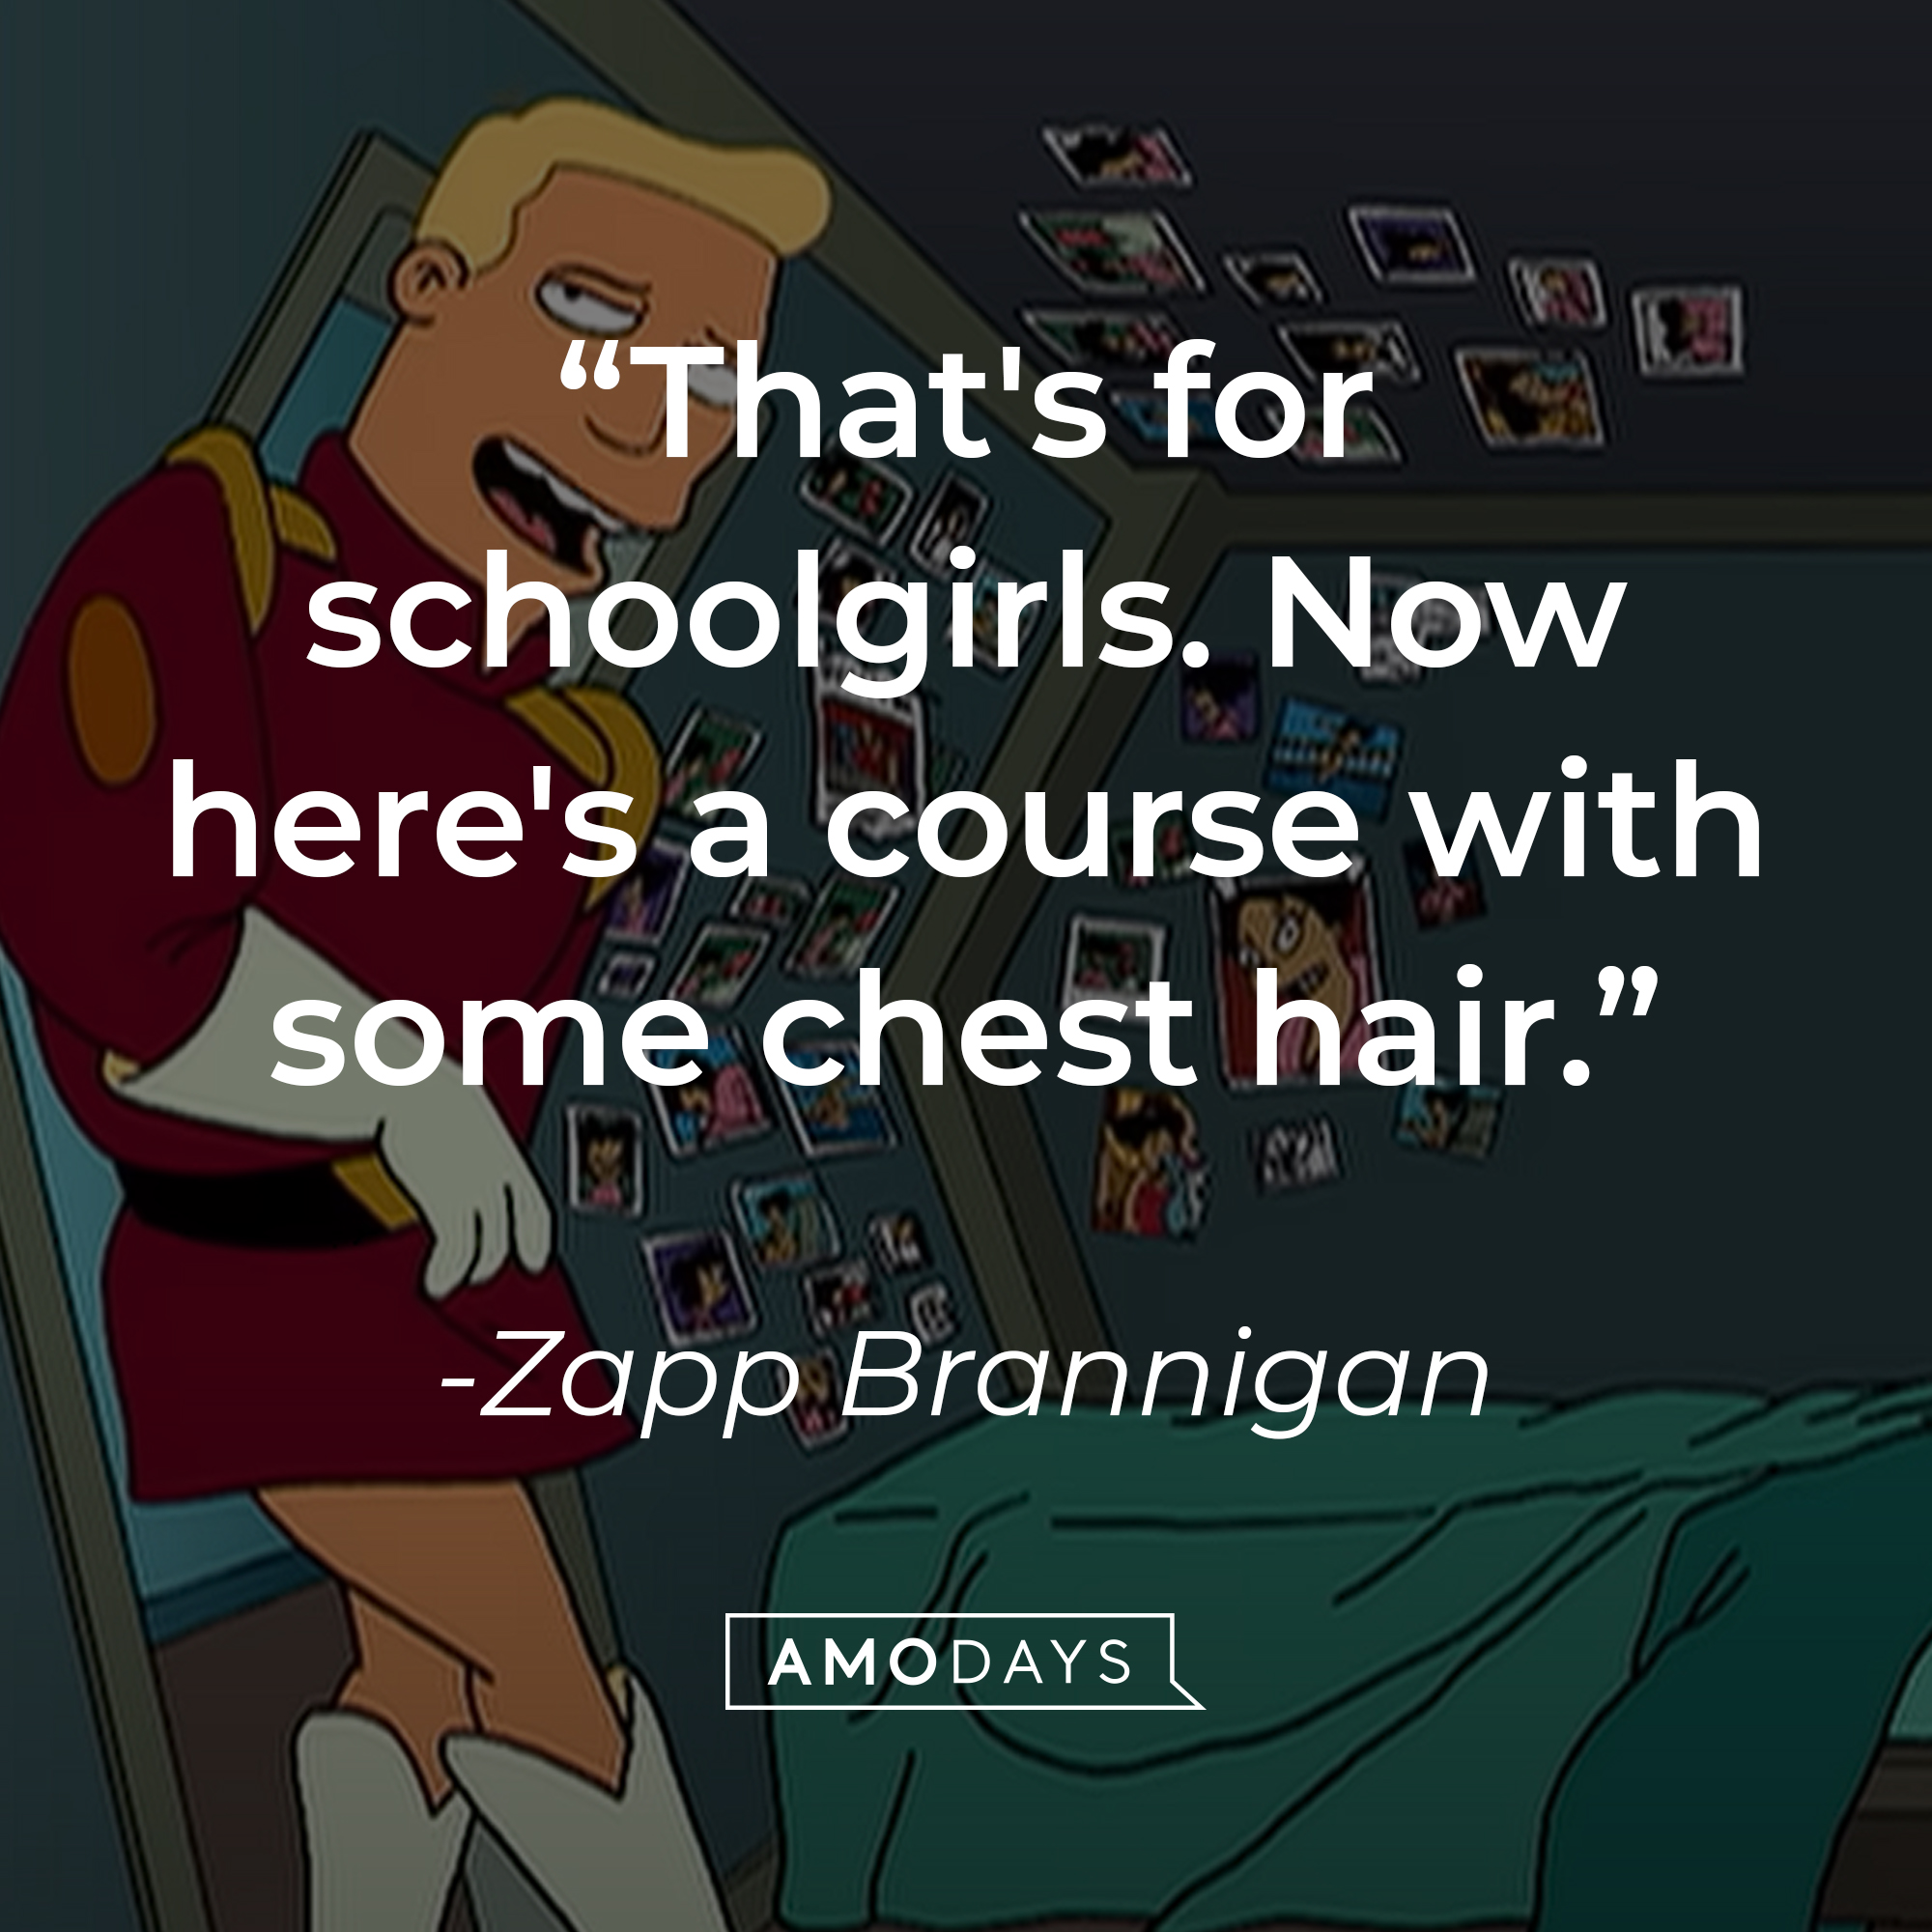 Zapp Brannigan's quote: "That's for schoolgirls. Now here's a course with some chest hair." | Source: YouTube/adultswim